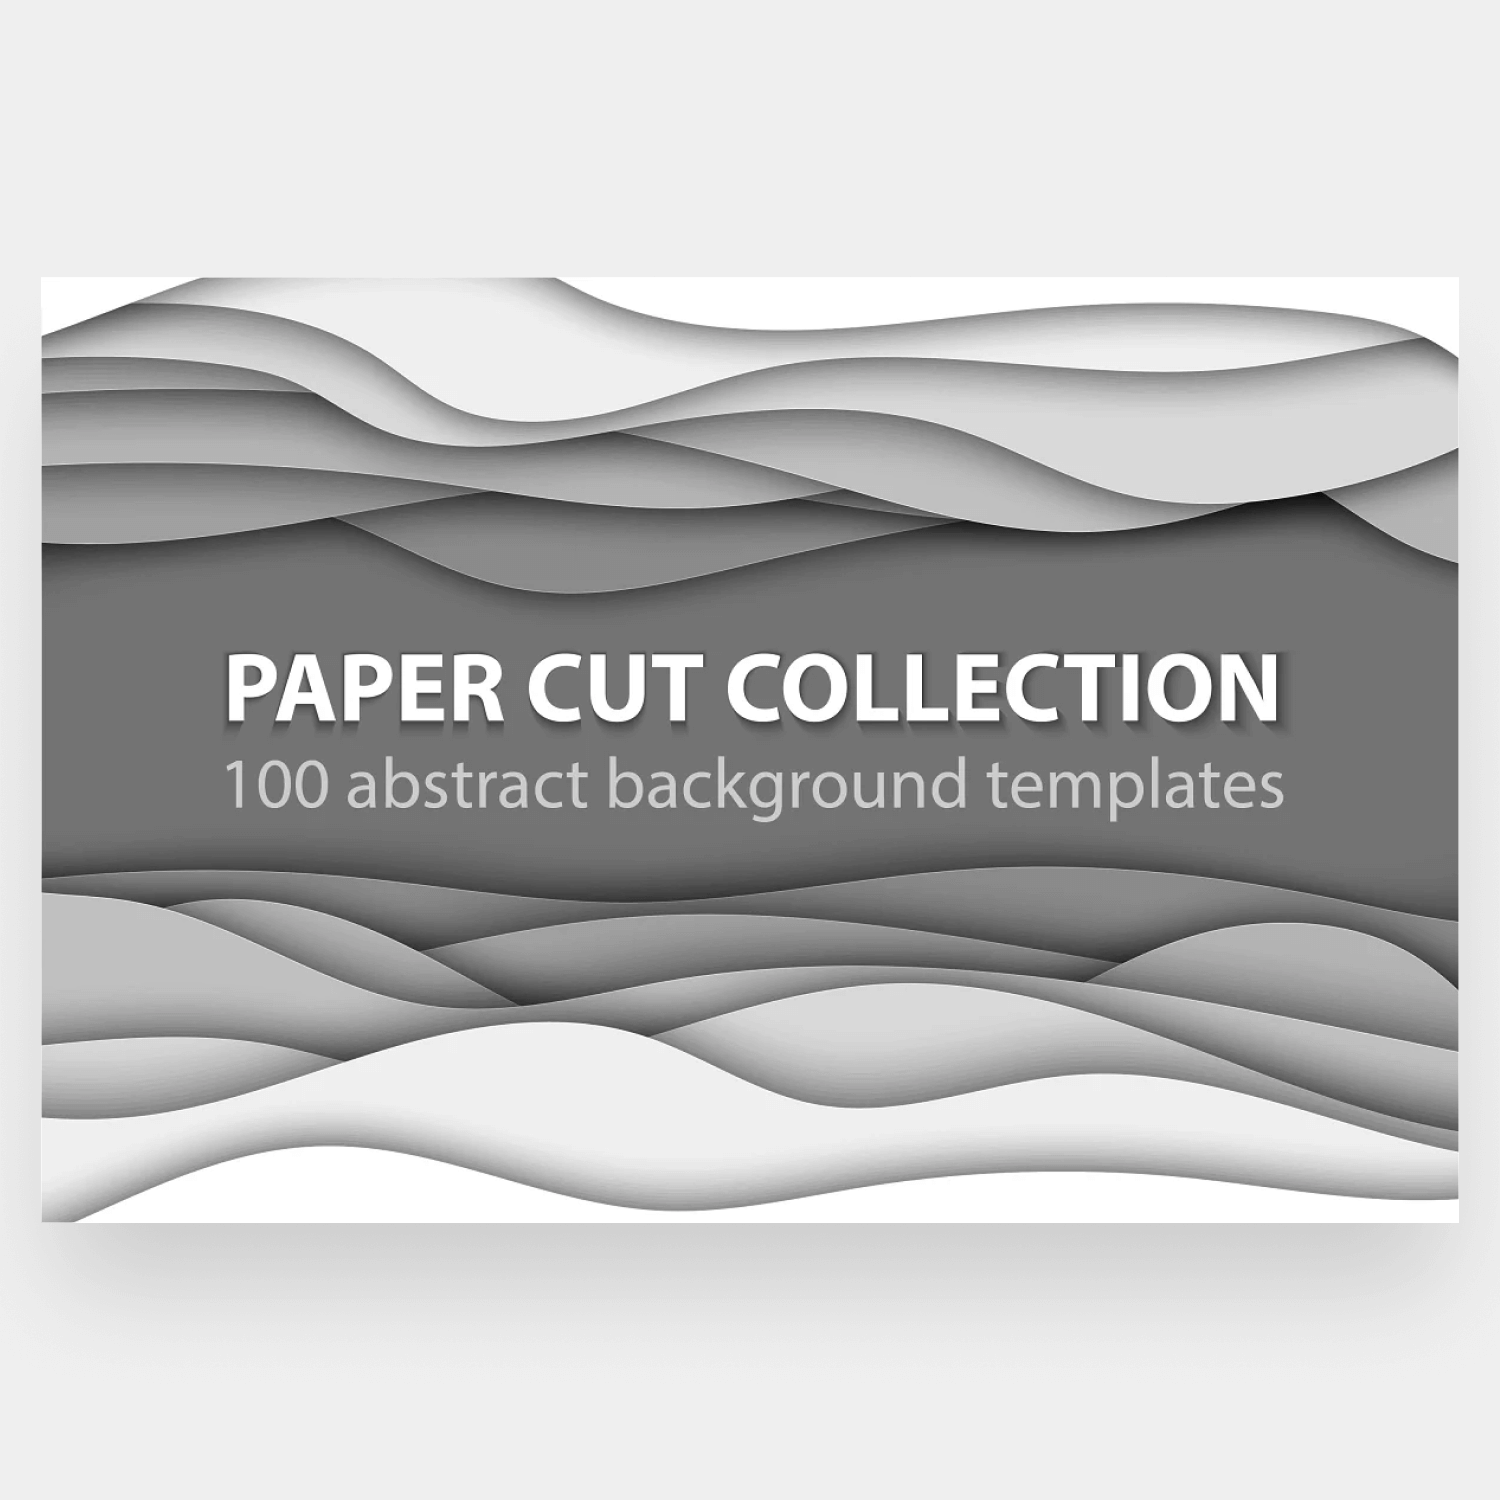 Paper cut collection of abstract background templates.